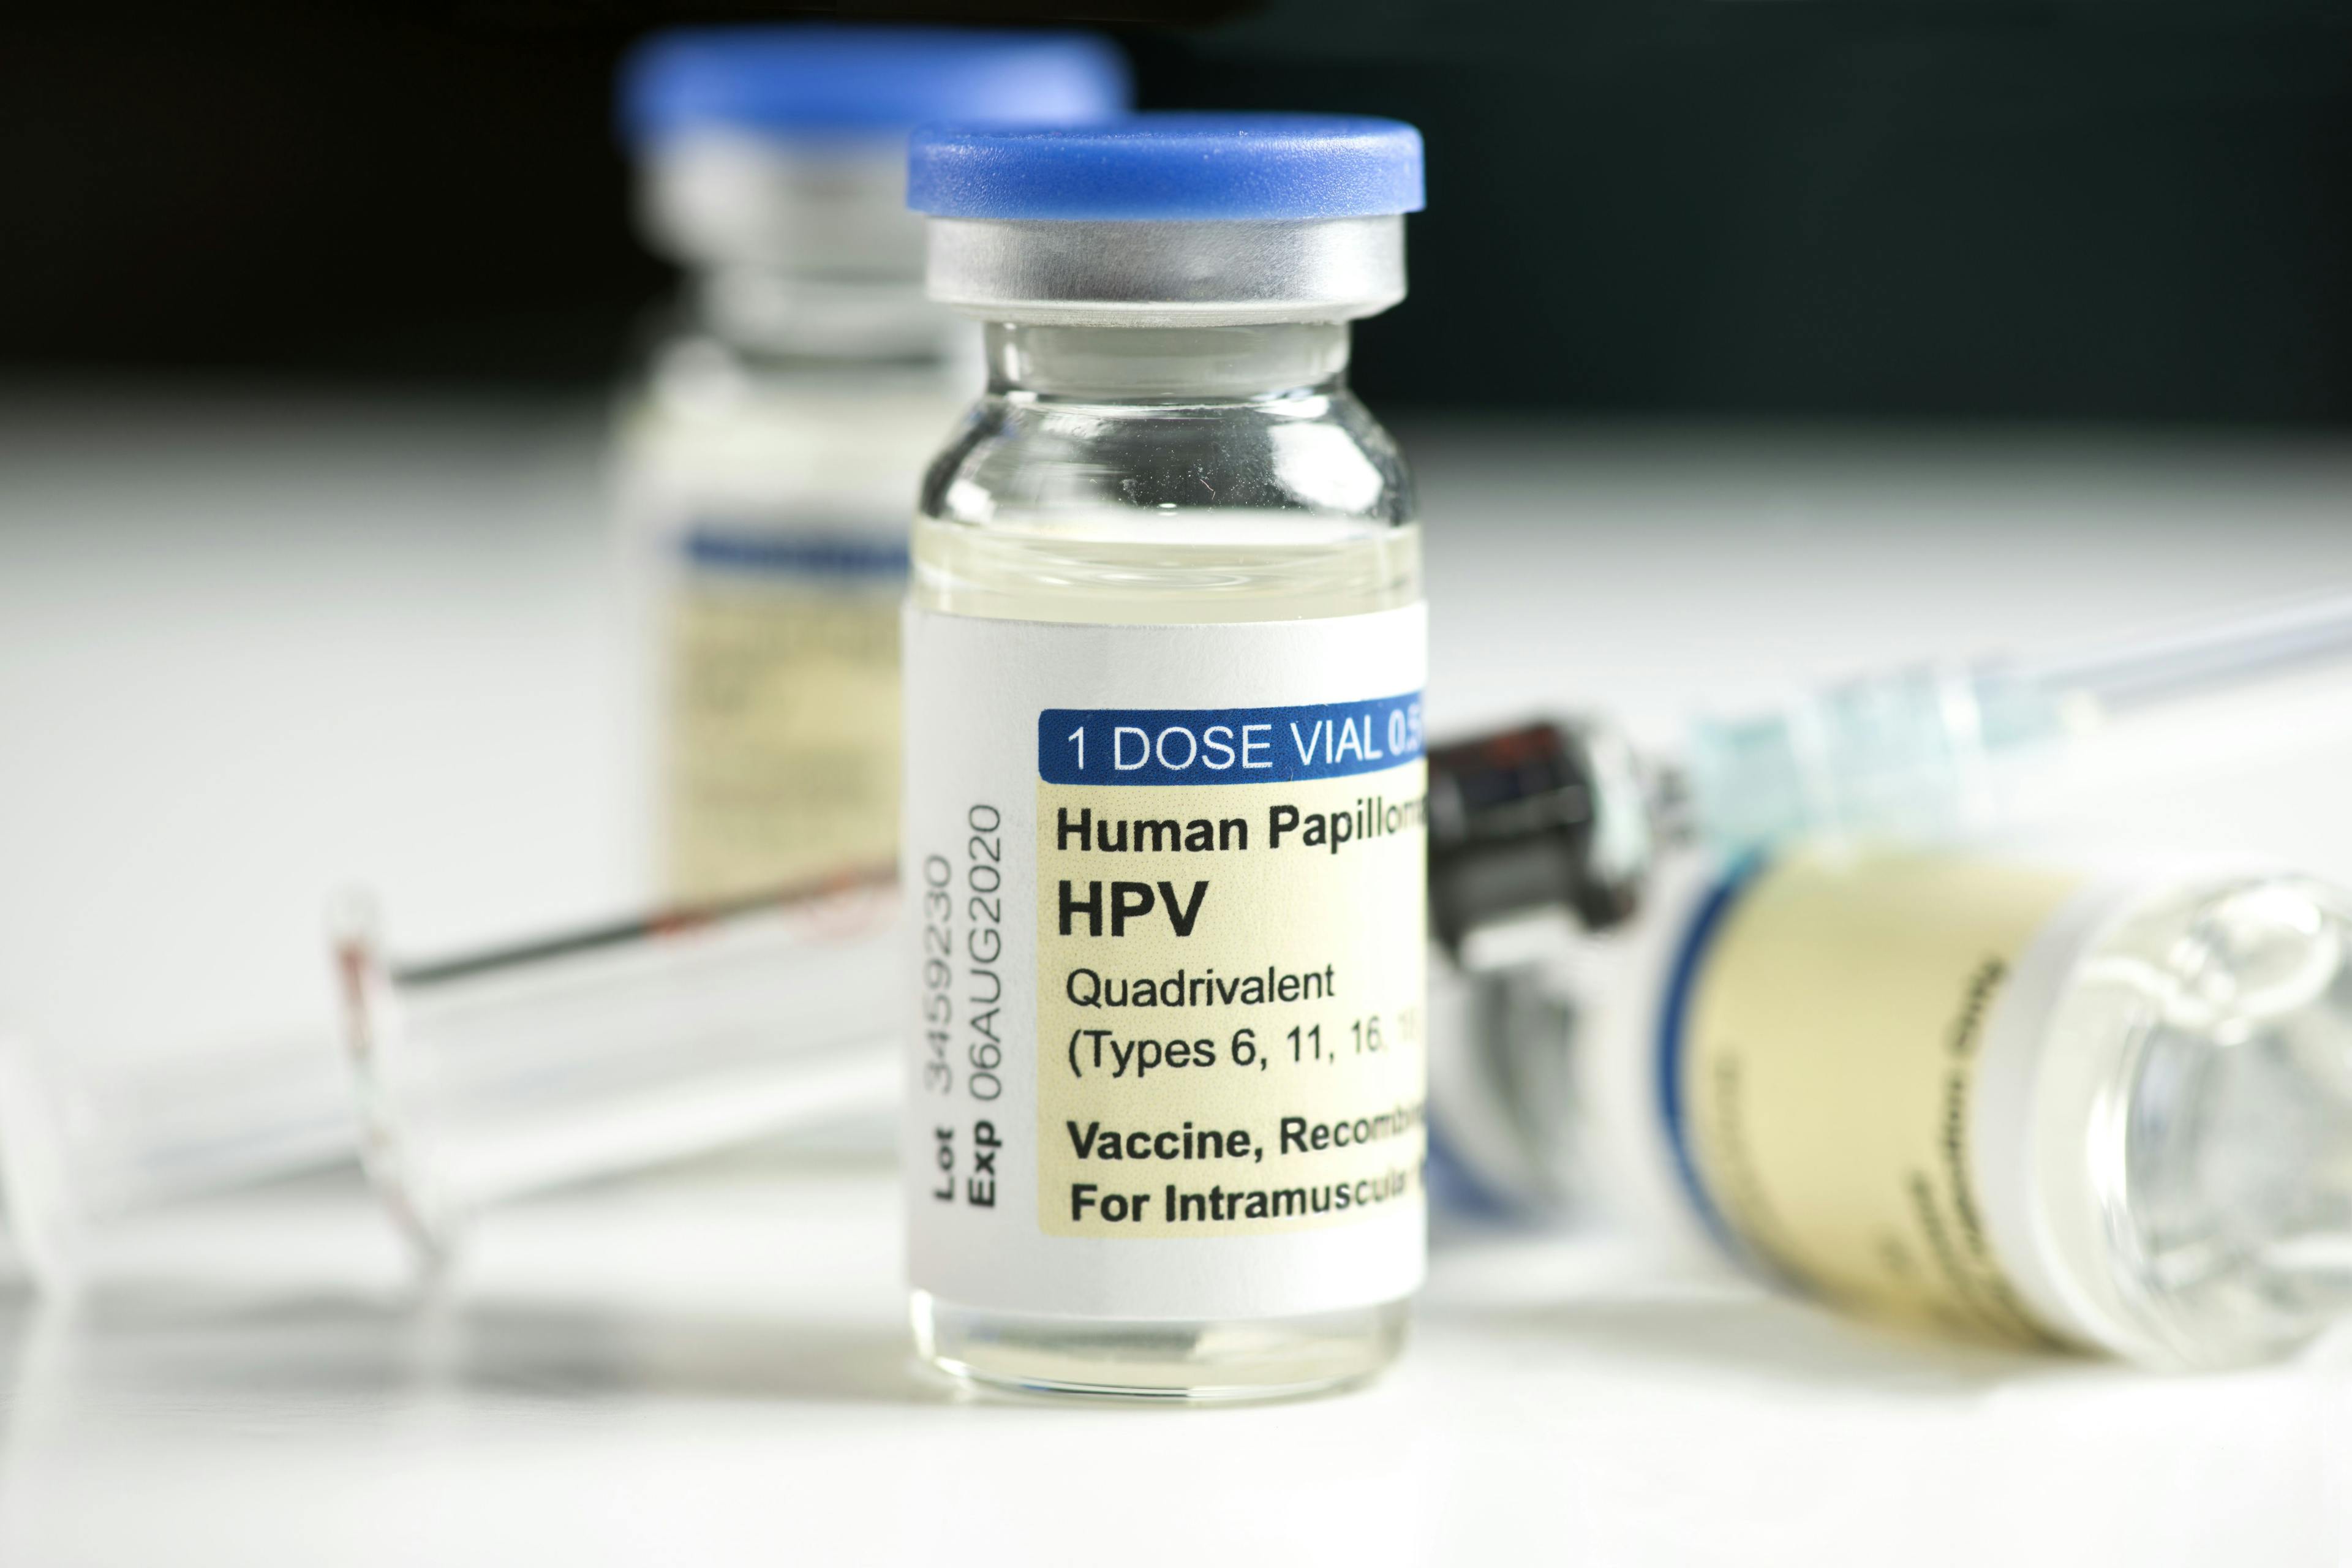 Cancer survivors obtain similar immune response to HPV vaccine as general population